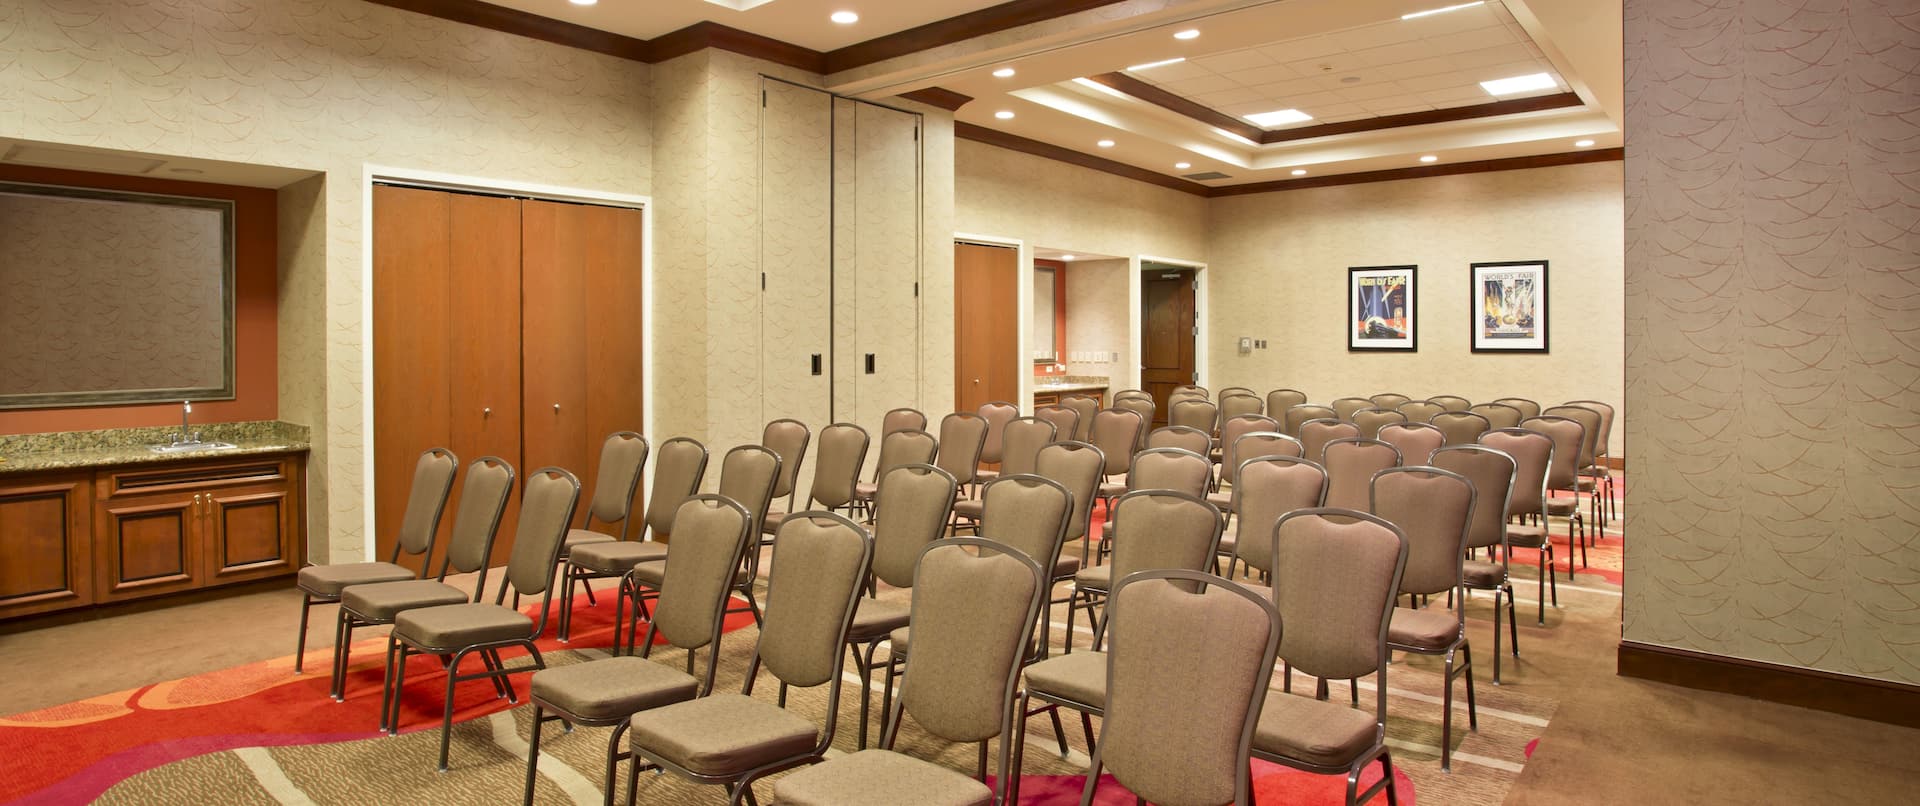  Meeting Rooms A+B Arranged With Rows of Chairs Theater Style